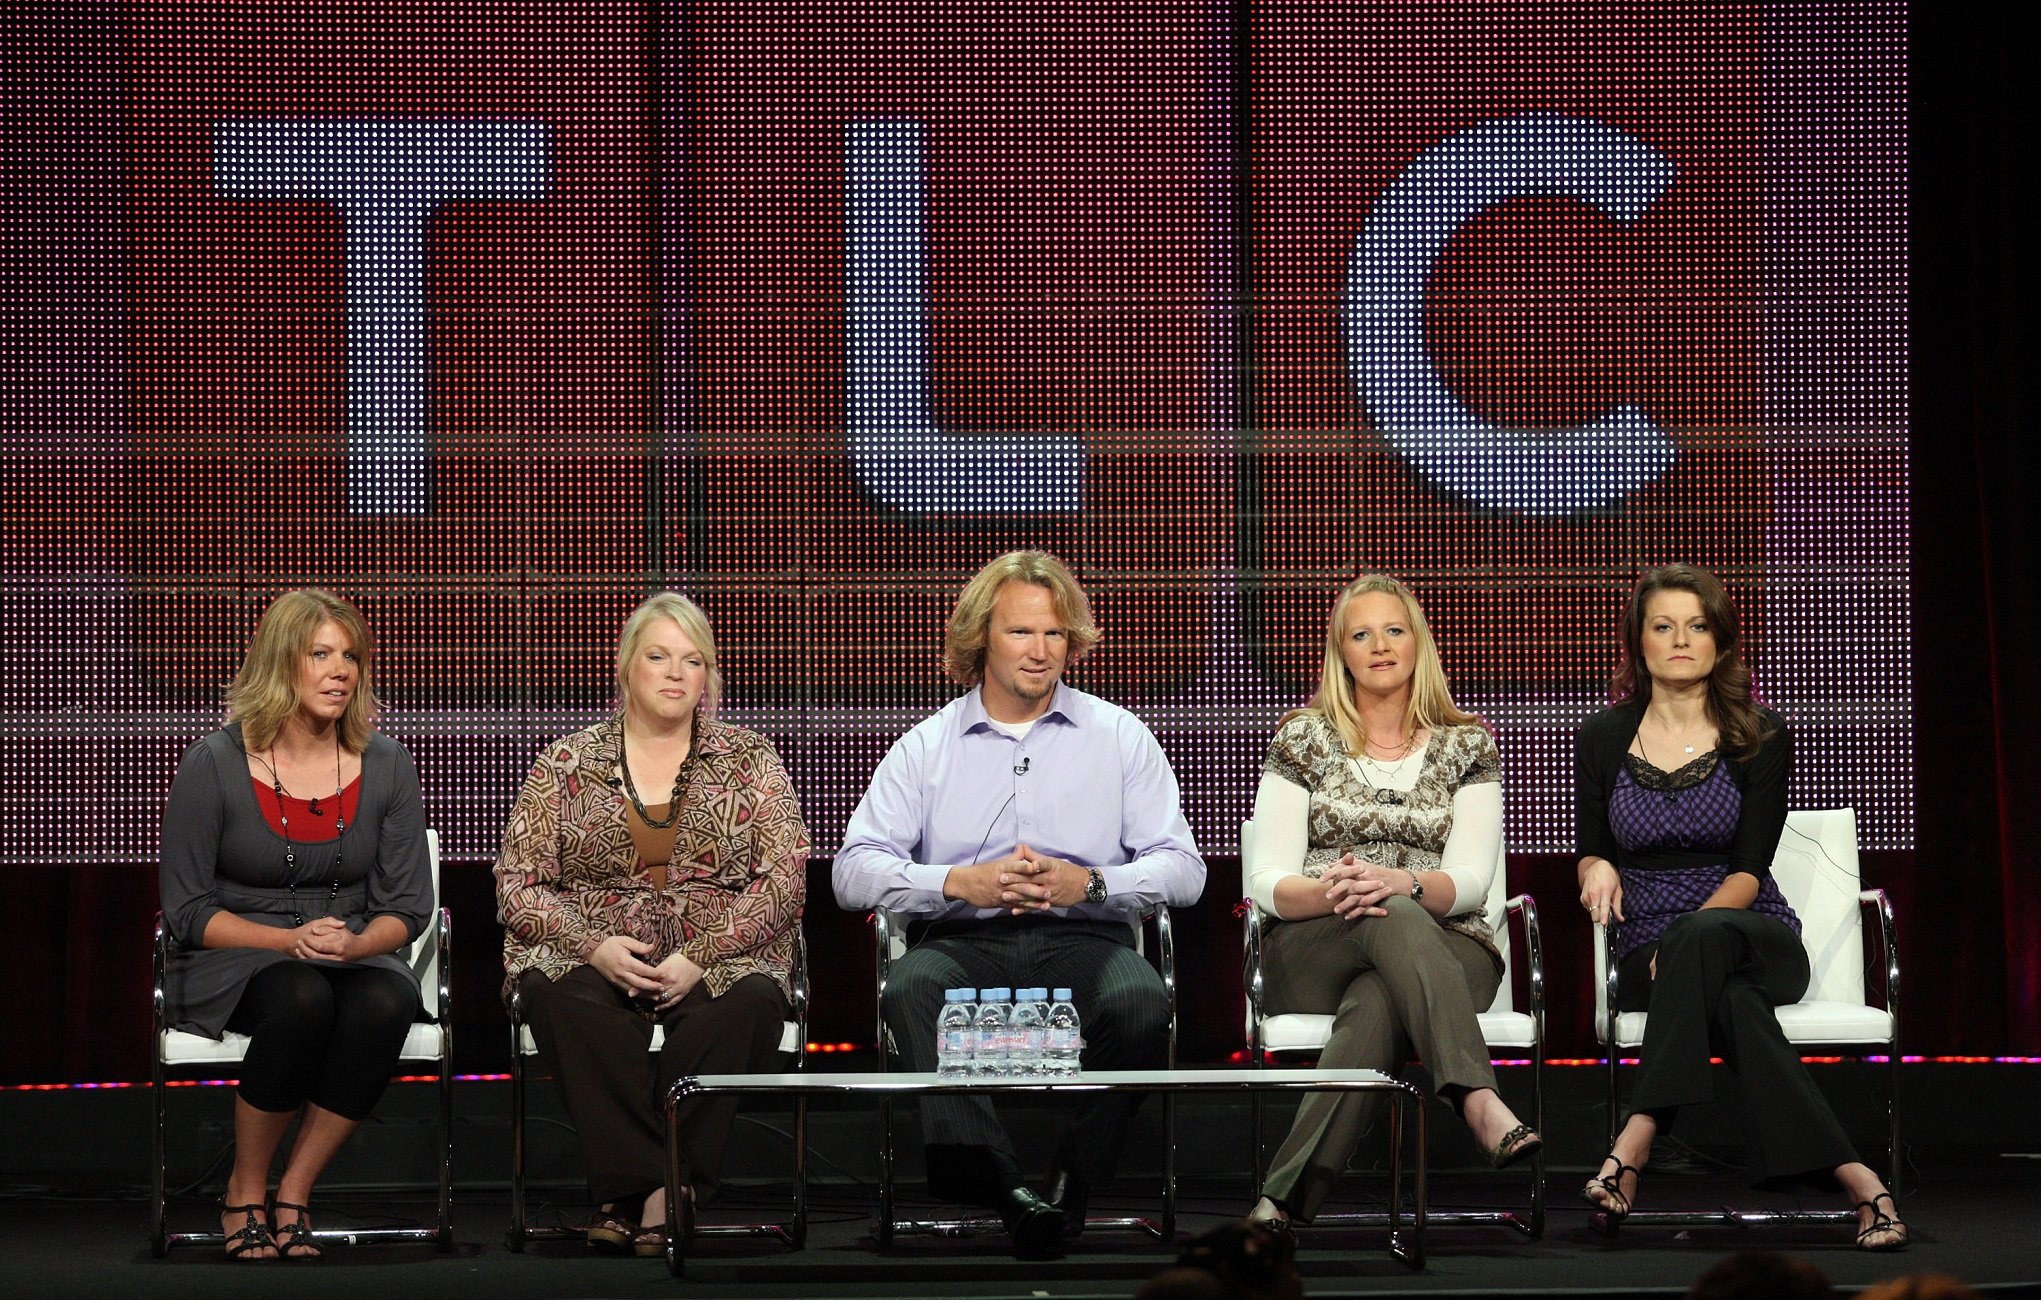 Meri Brwon, Janelle Brown, Kody Brown, Christine Brown and Robyn Brown appear for a 'Sister Wives' panel